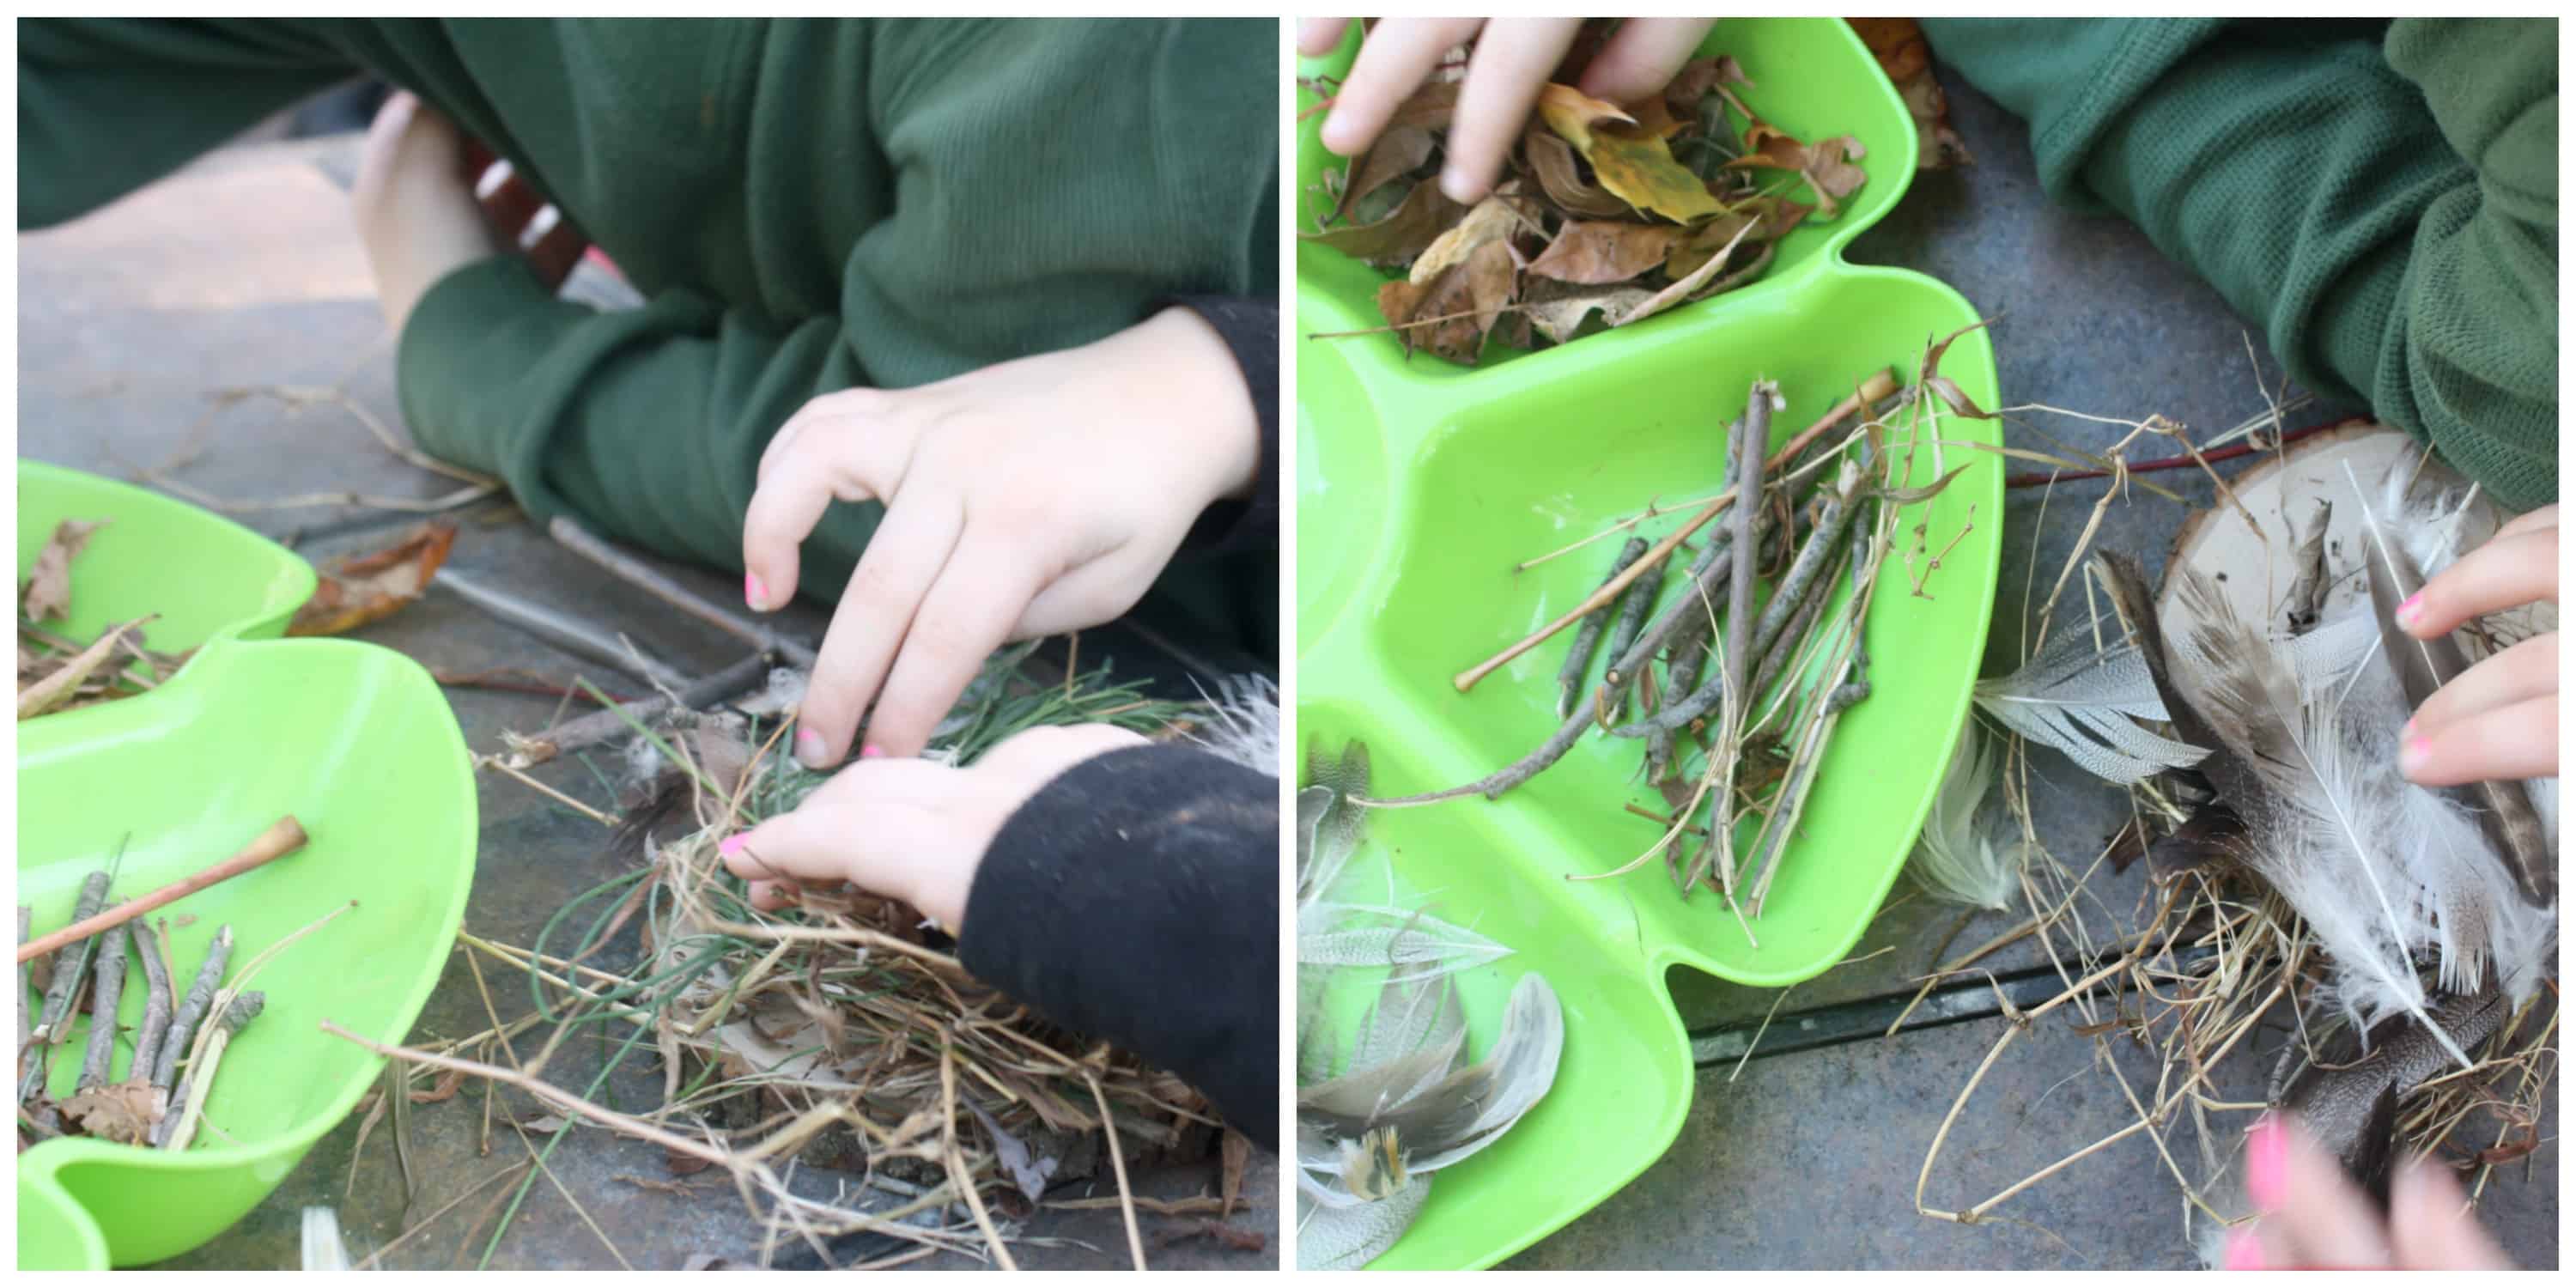 Can you build a nest? This STEM challenge for kids gets kids thinking creatively and applying imagination to science! 